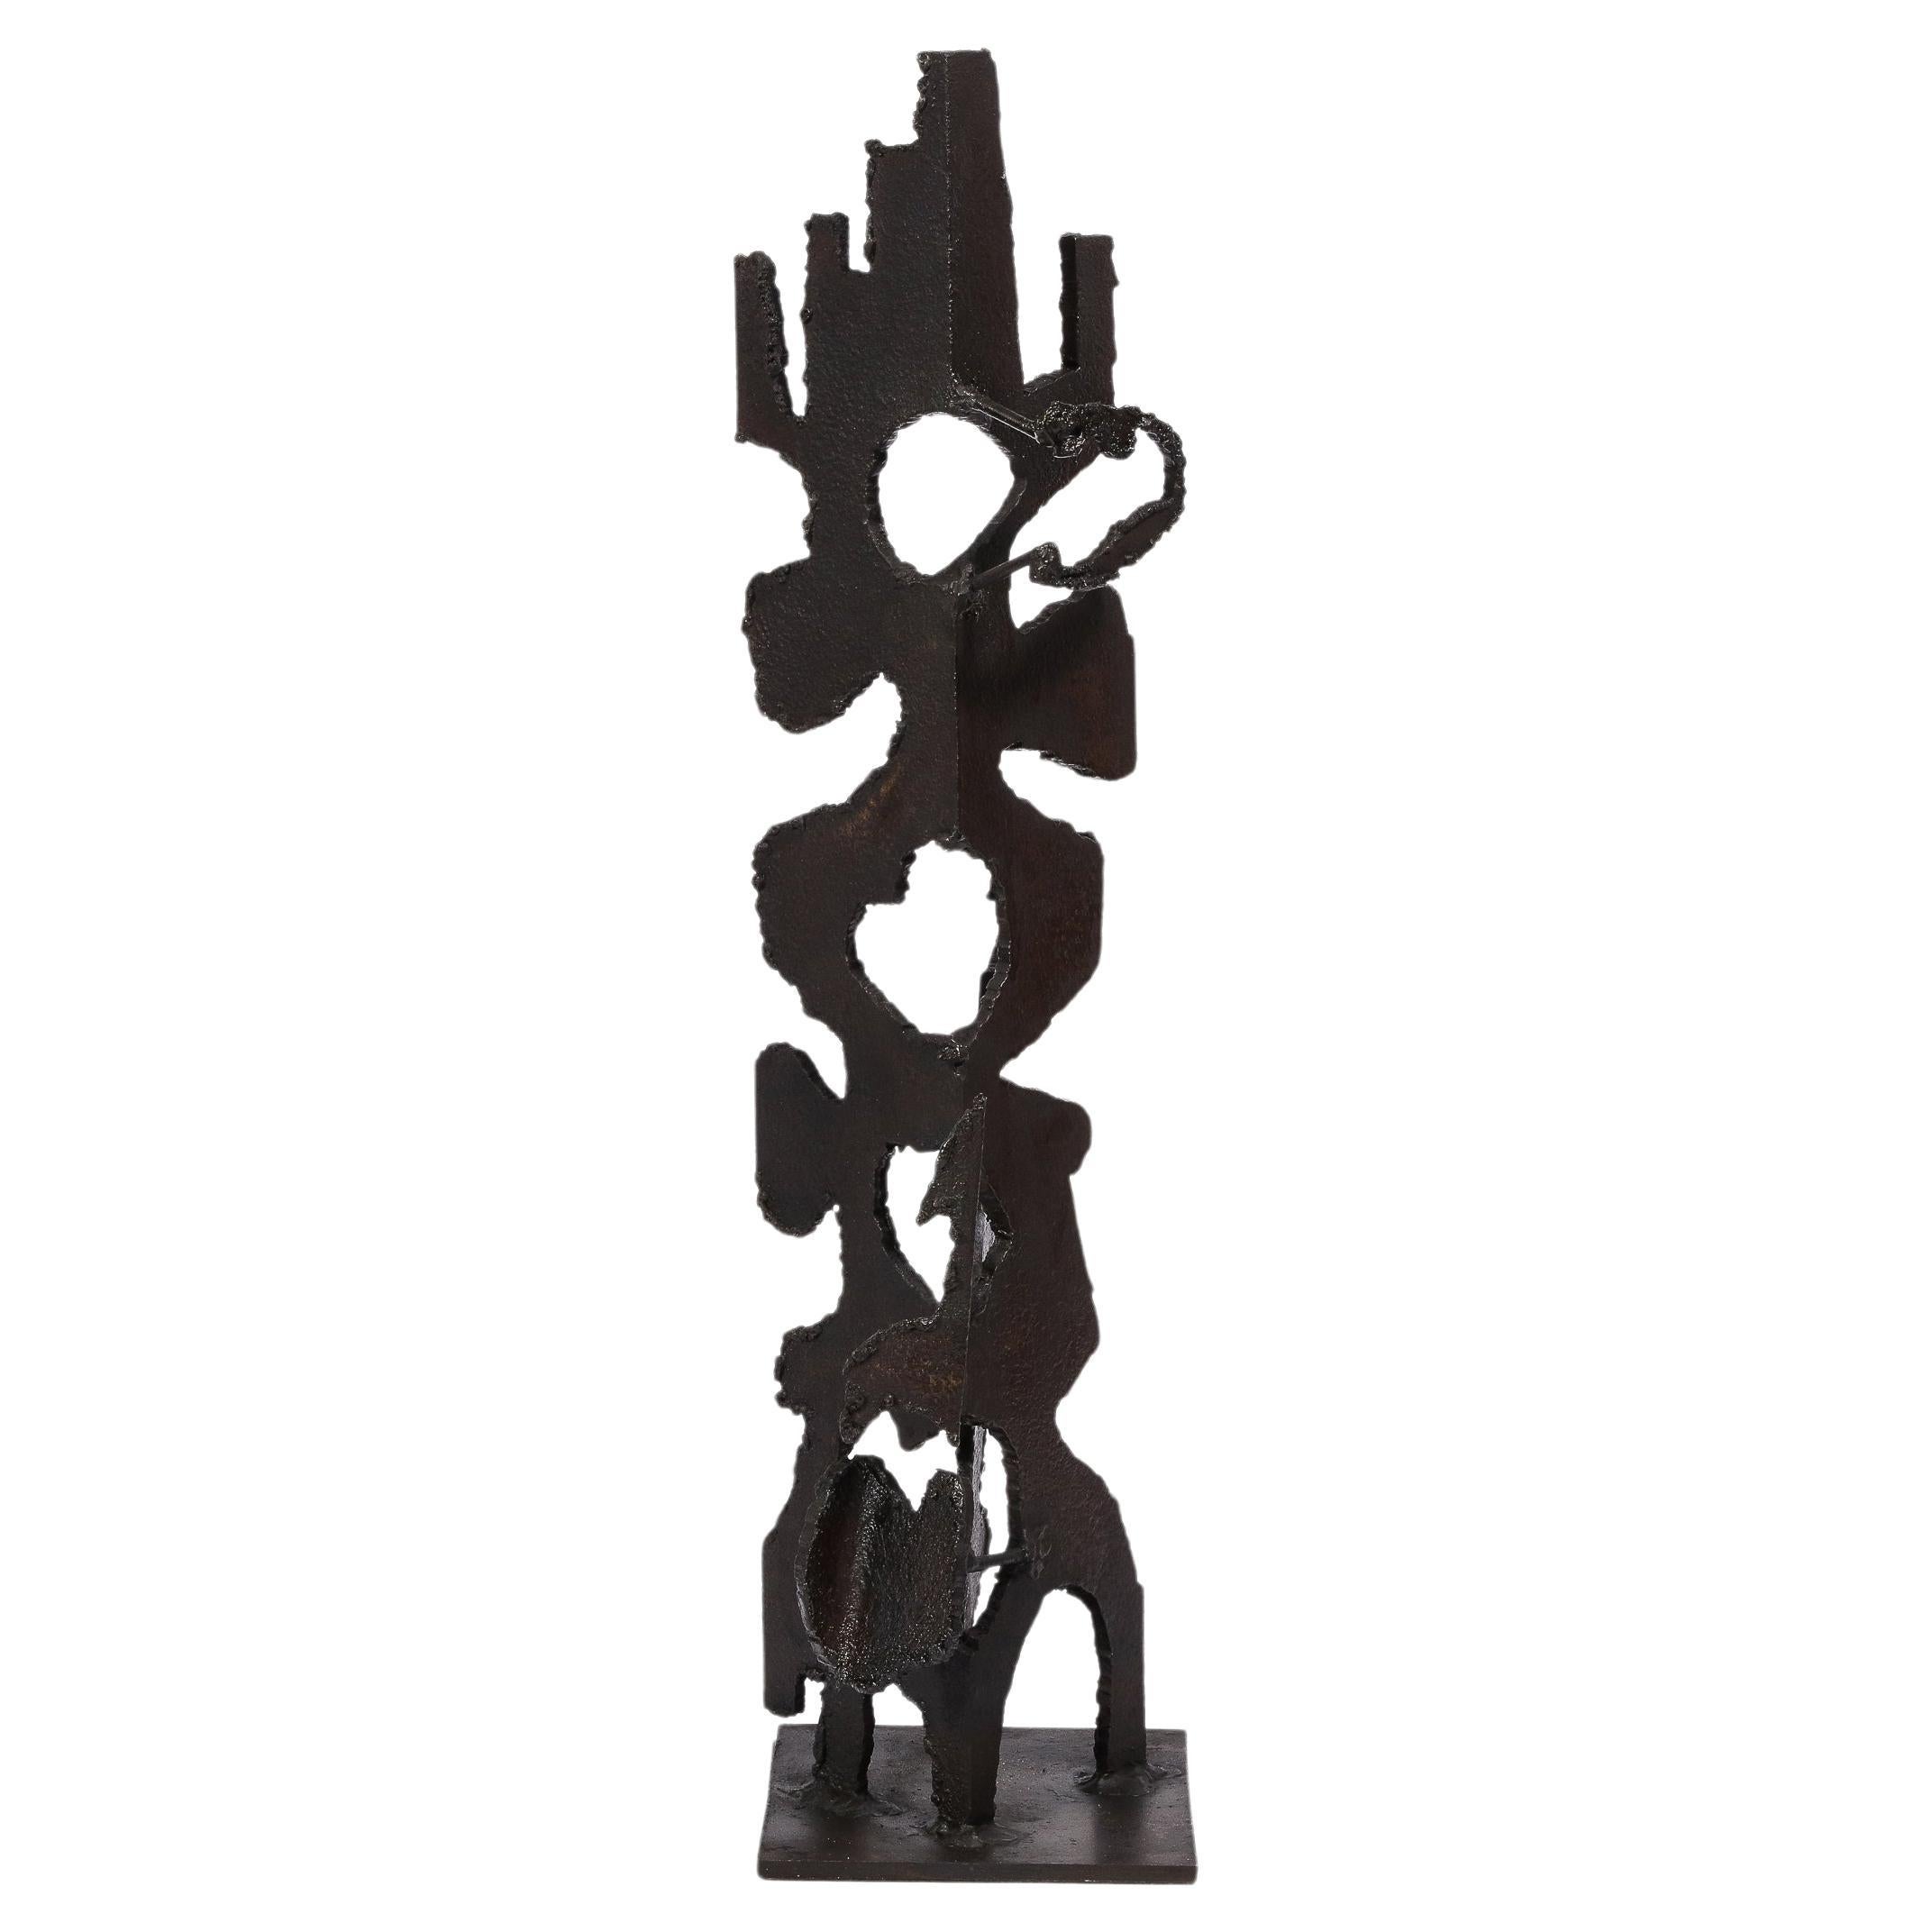 Brutalist Steel Sculpture in Oil and Waxed Finish by Jan Van Deckter For Sale